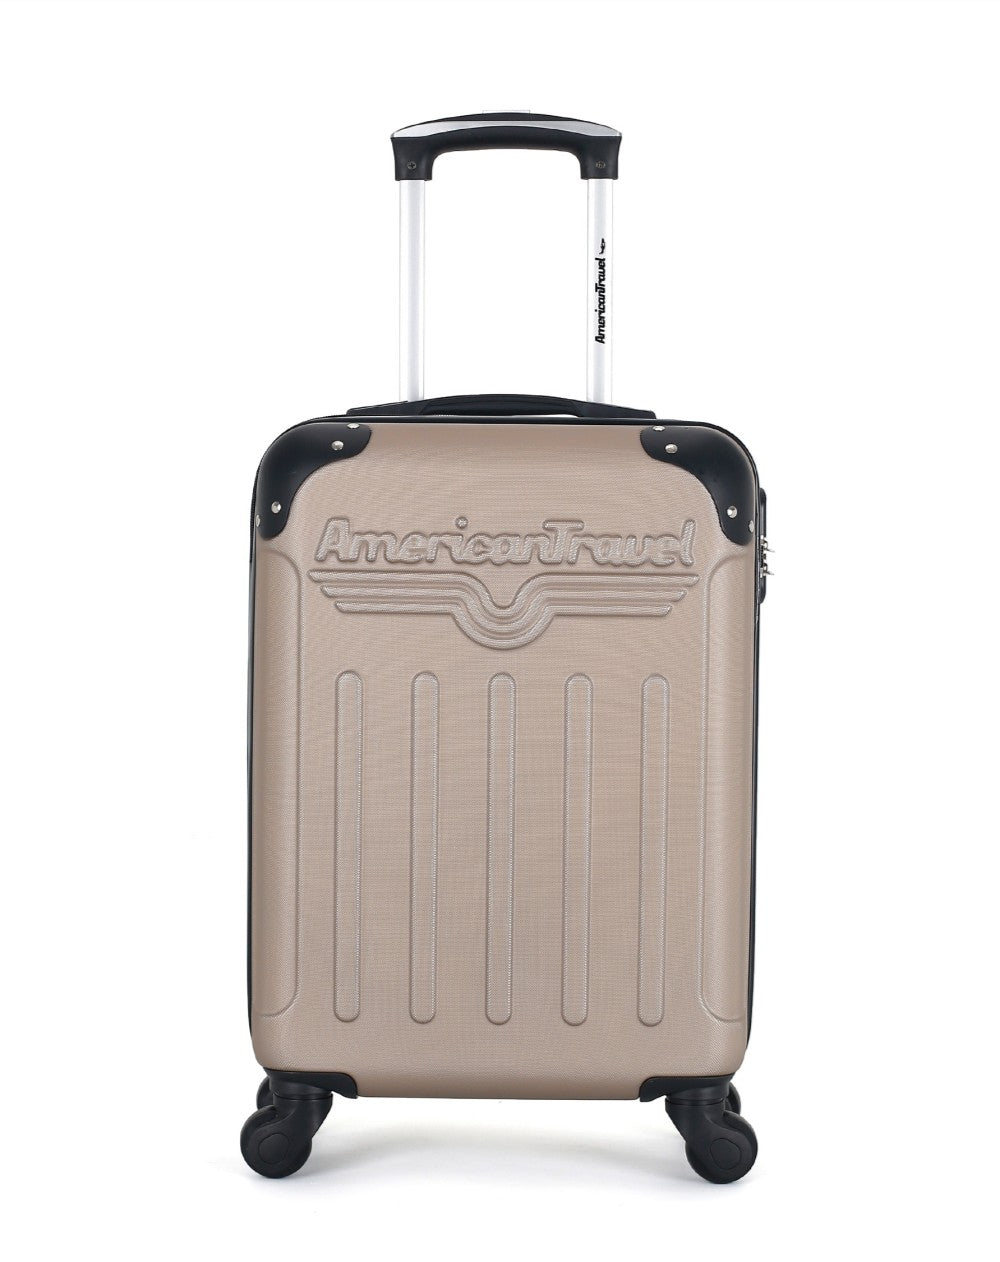 Valise Cabine ABS HARLEM-E 4 Roues 50 cm